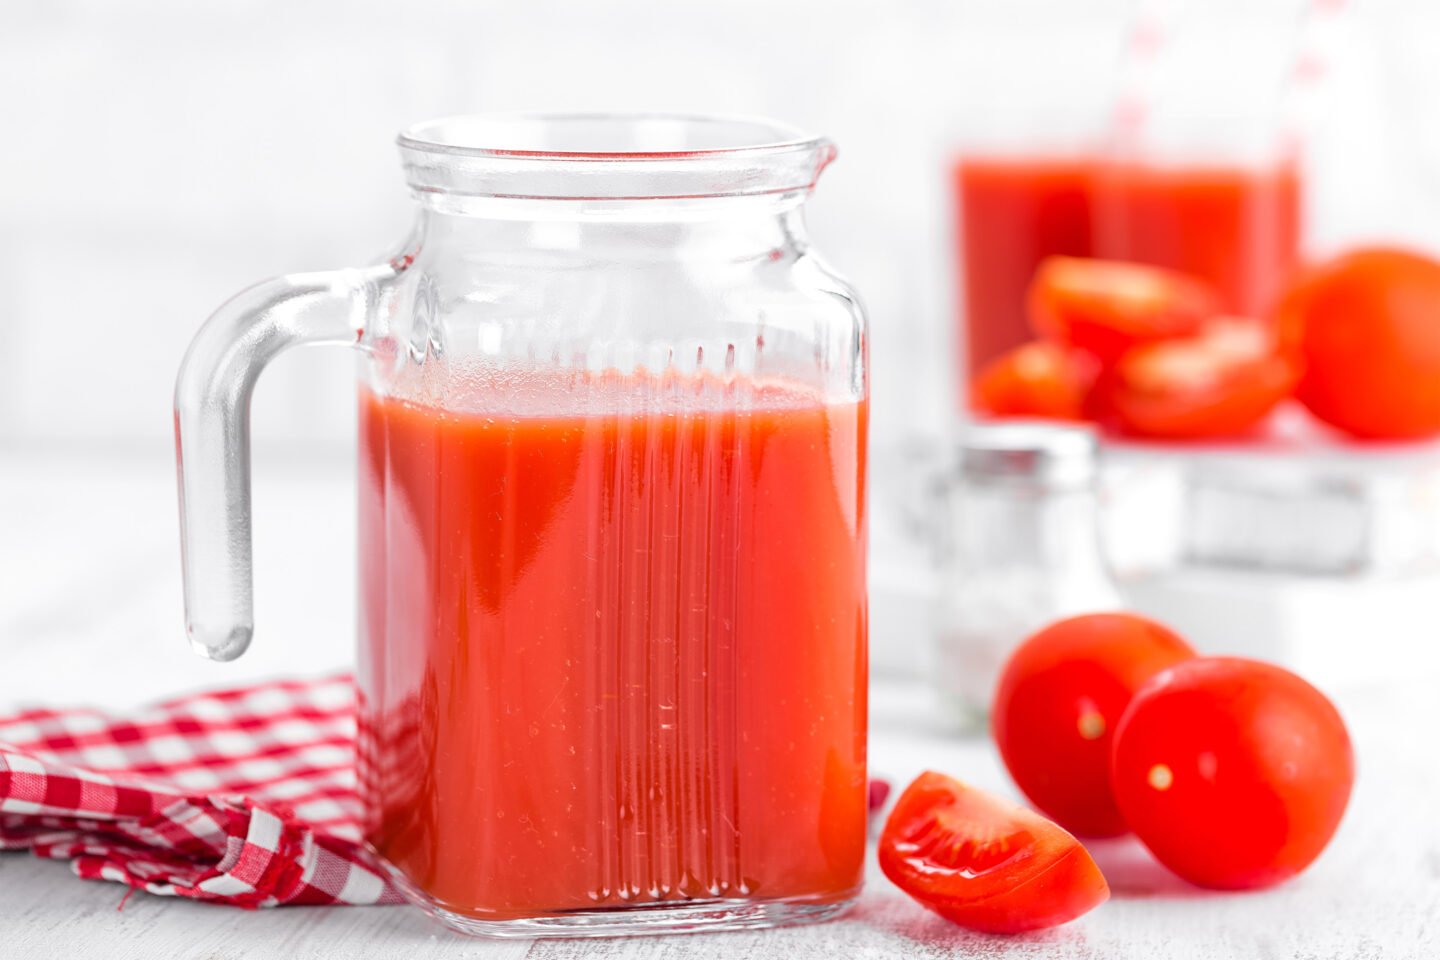 tomato juice in pitcher and glass